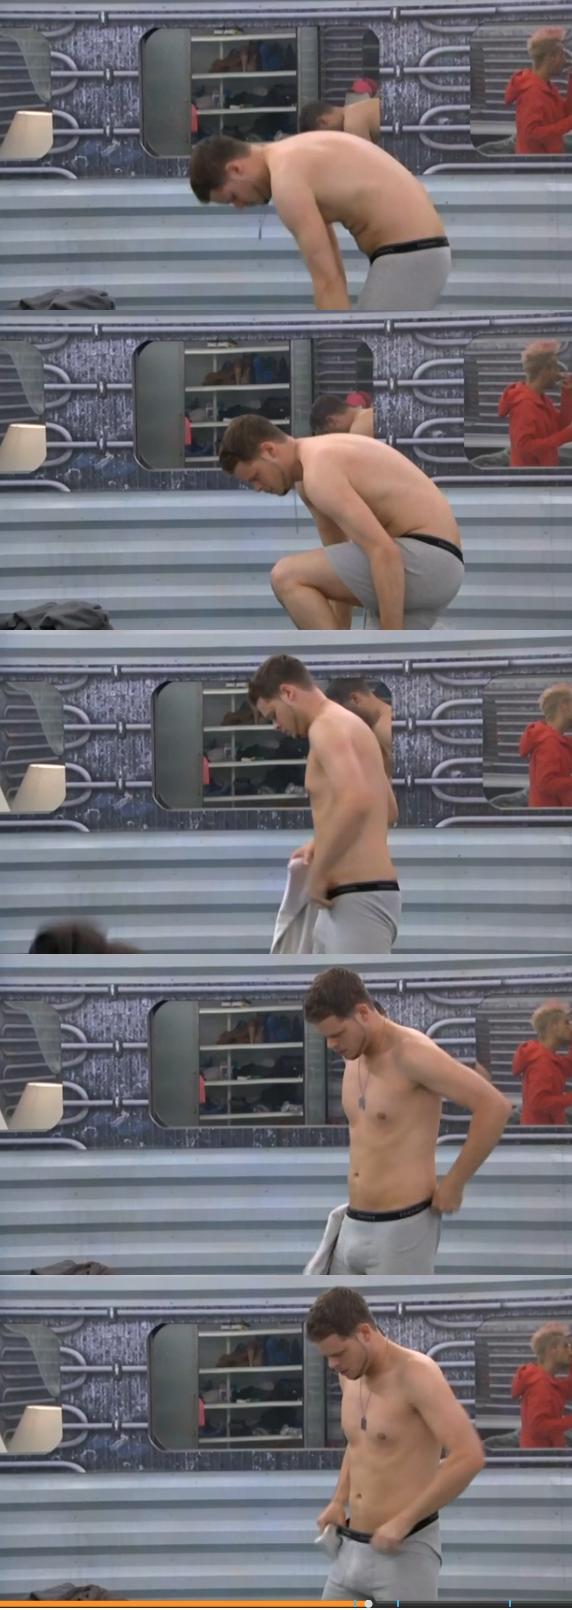 Some Derrick underwear caps from a month ago, thank you to the anon who suggested